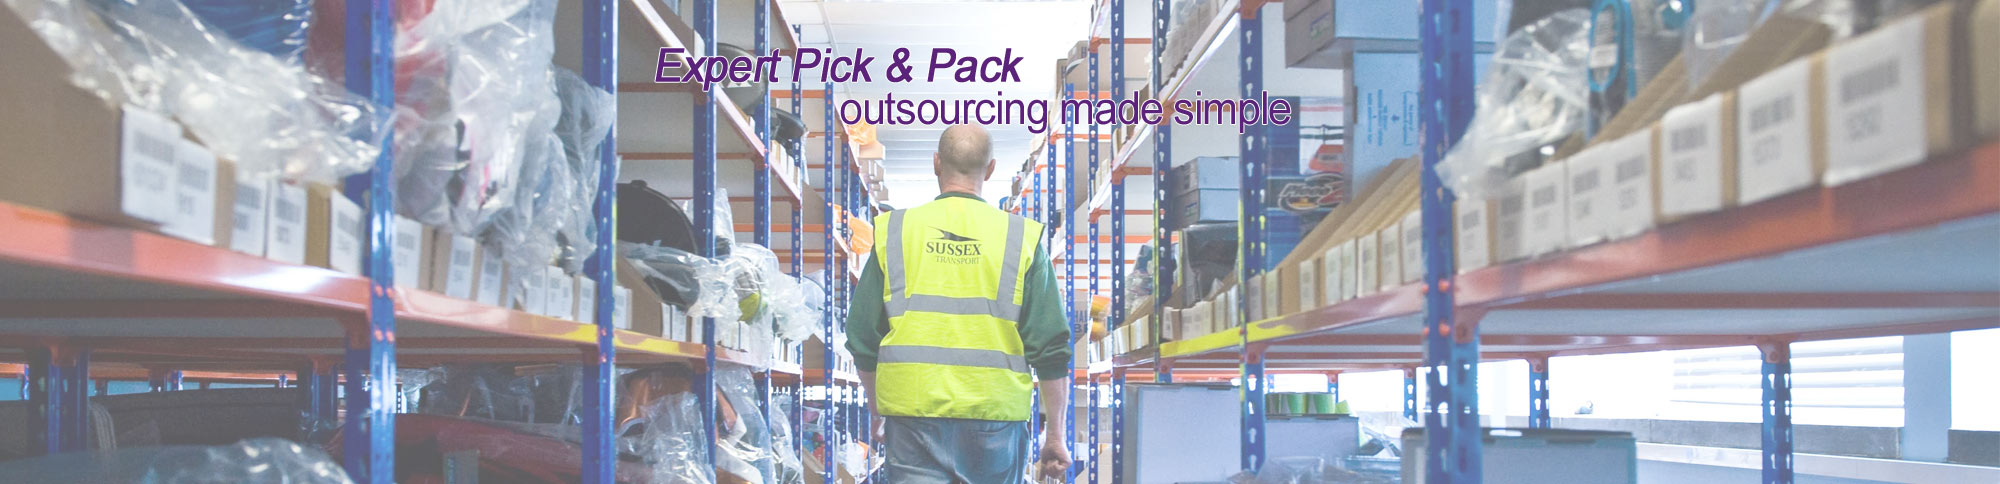 Expert Pick & Pack outsourcing made simple.